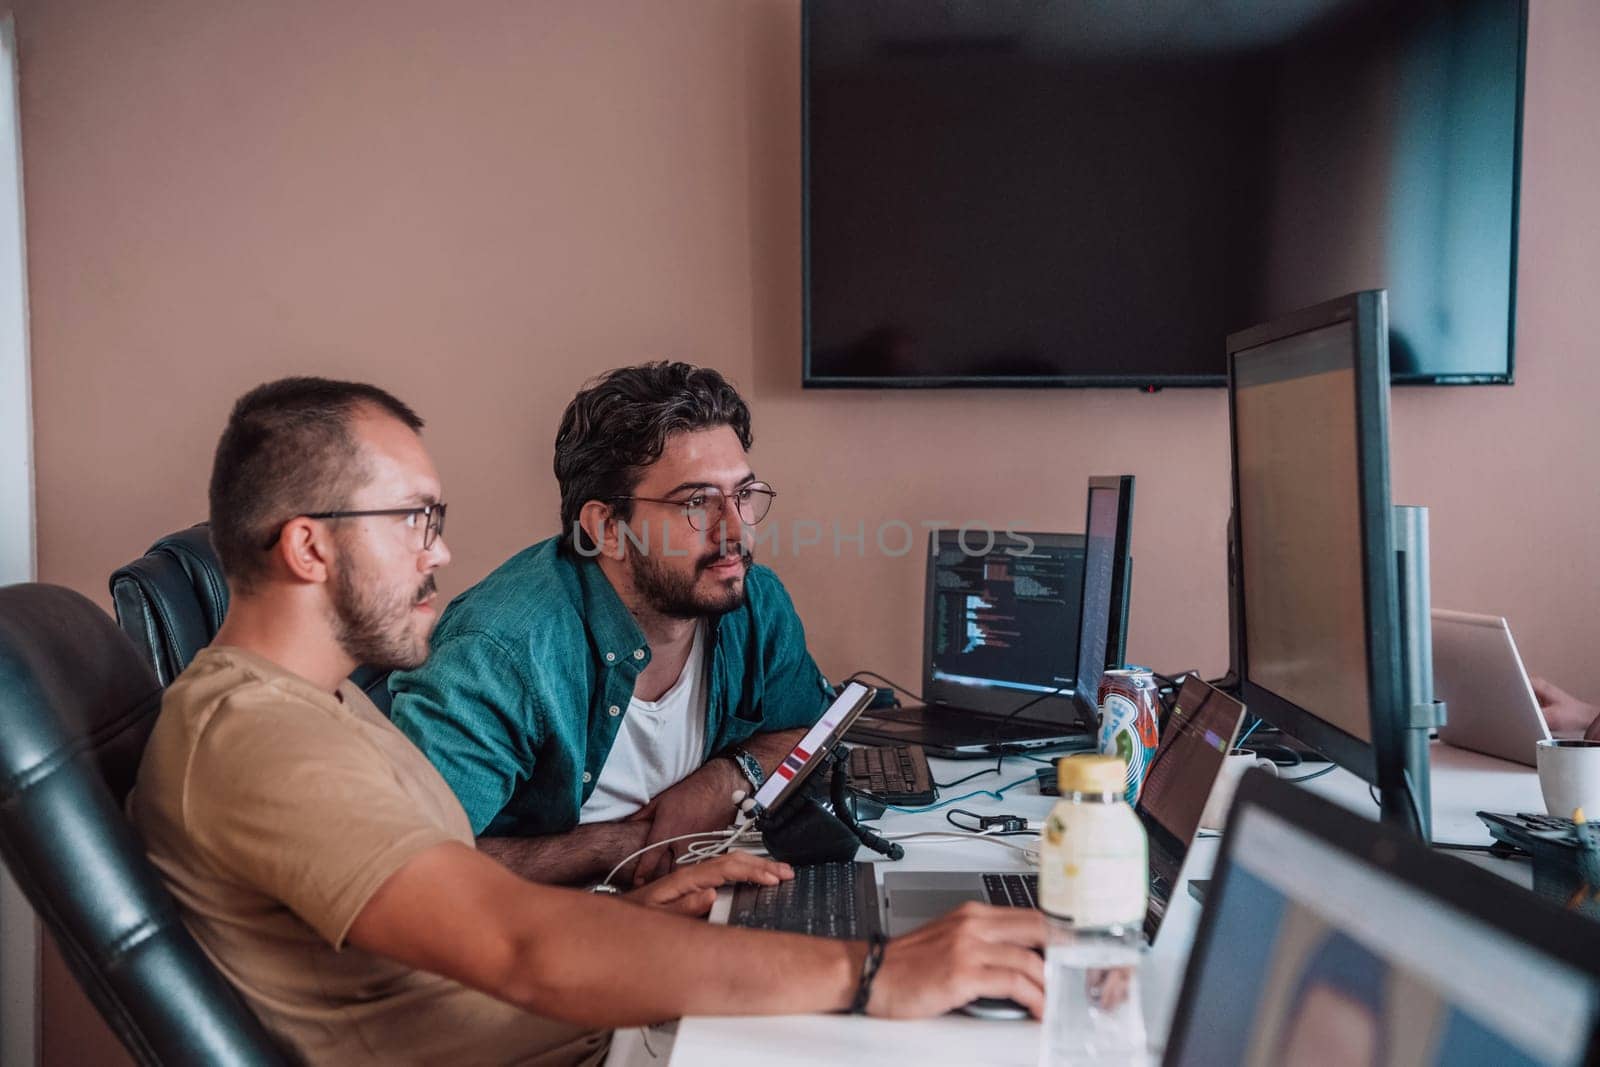 Programmers engrossed in deep collaboration, diligently working together to solve complex problems and develop innovative mobile applications with seamless functionality. by dotshock